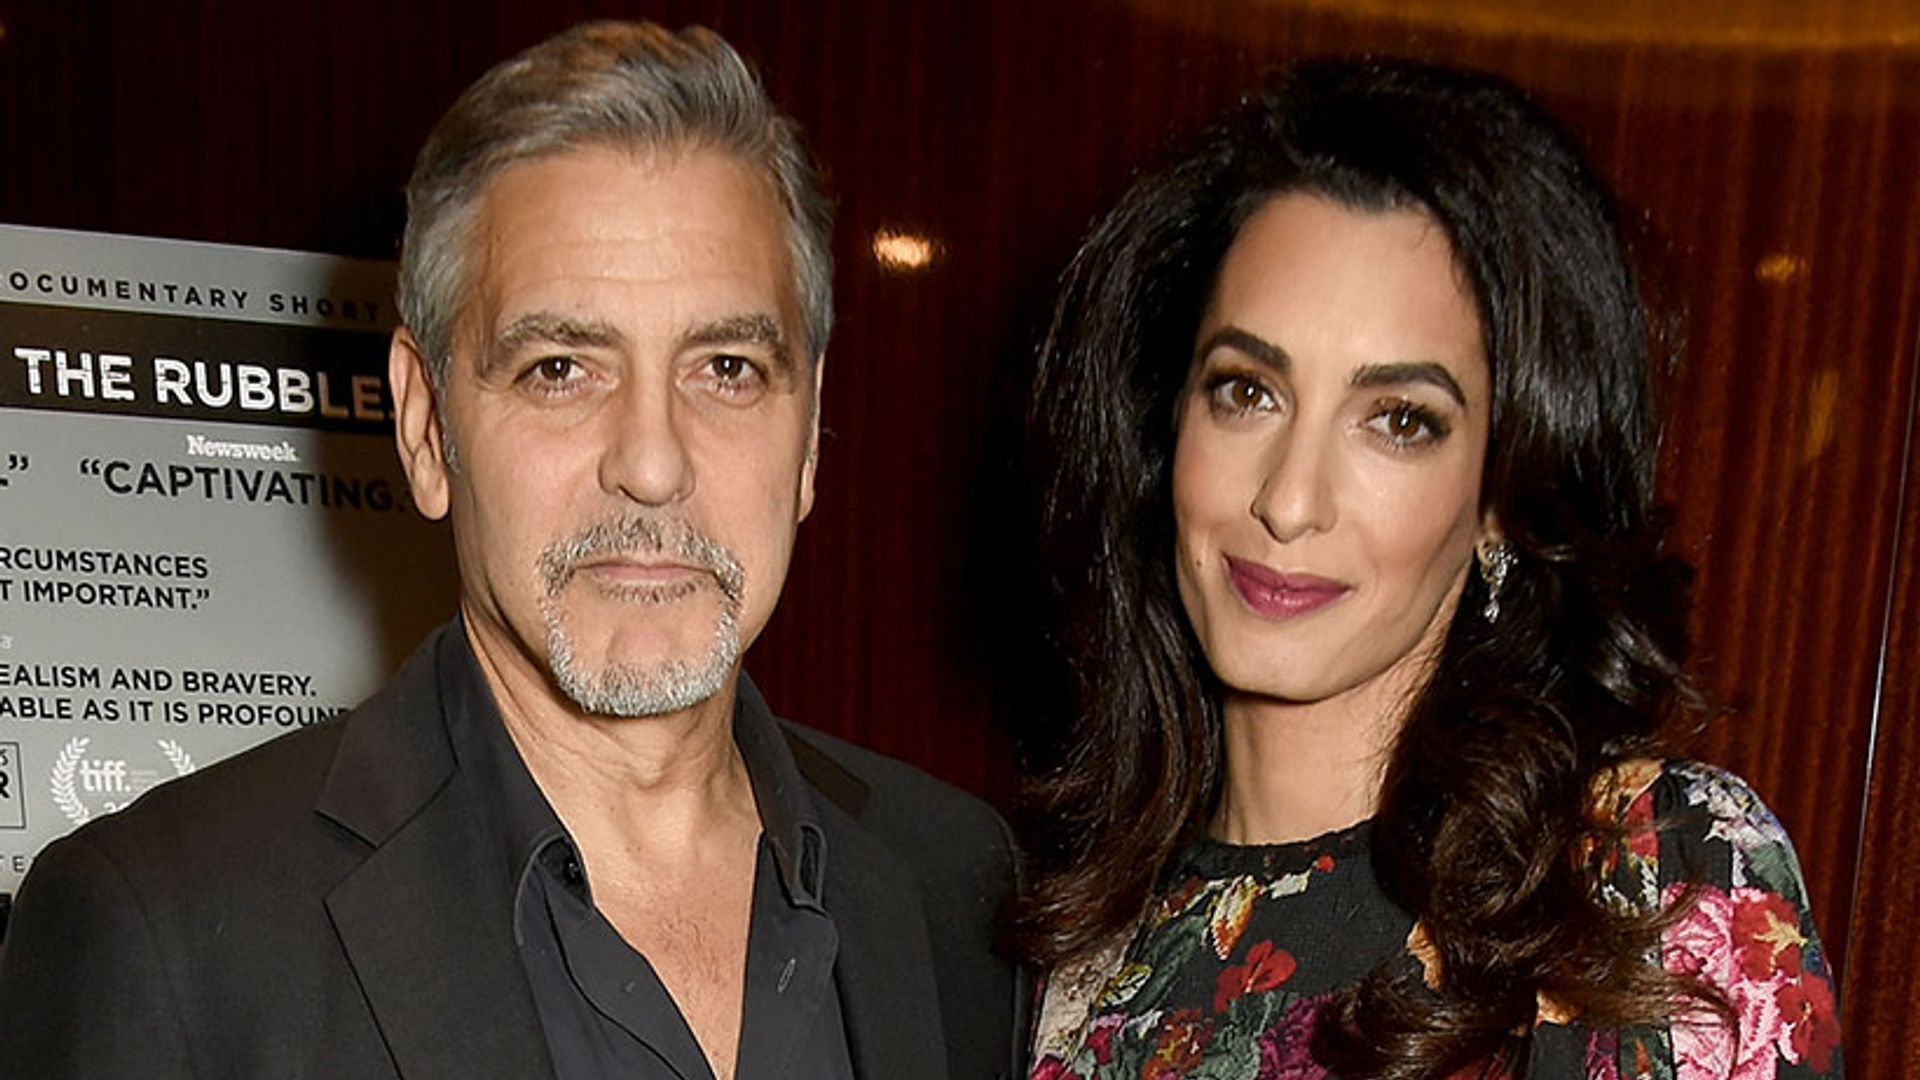 George Clooney on becoming a first-time father to twins: 'It's going to be an adventure'